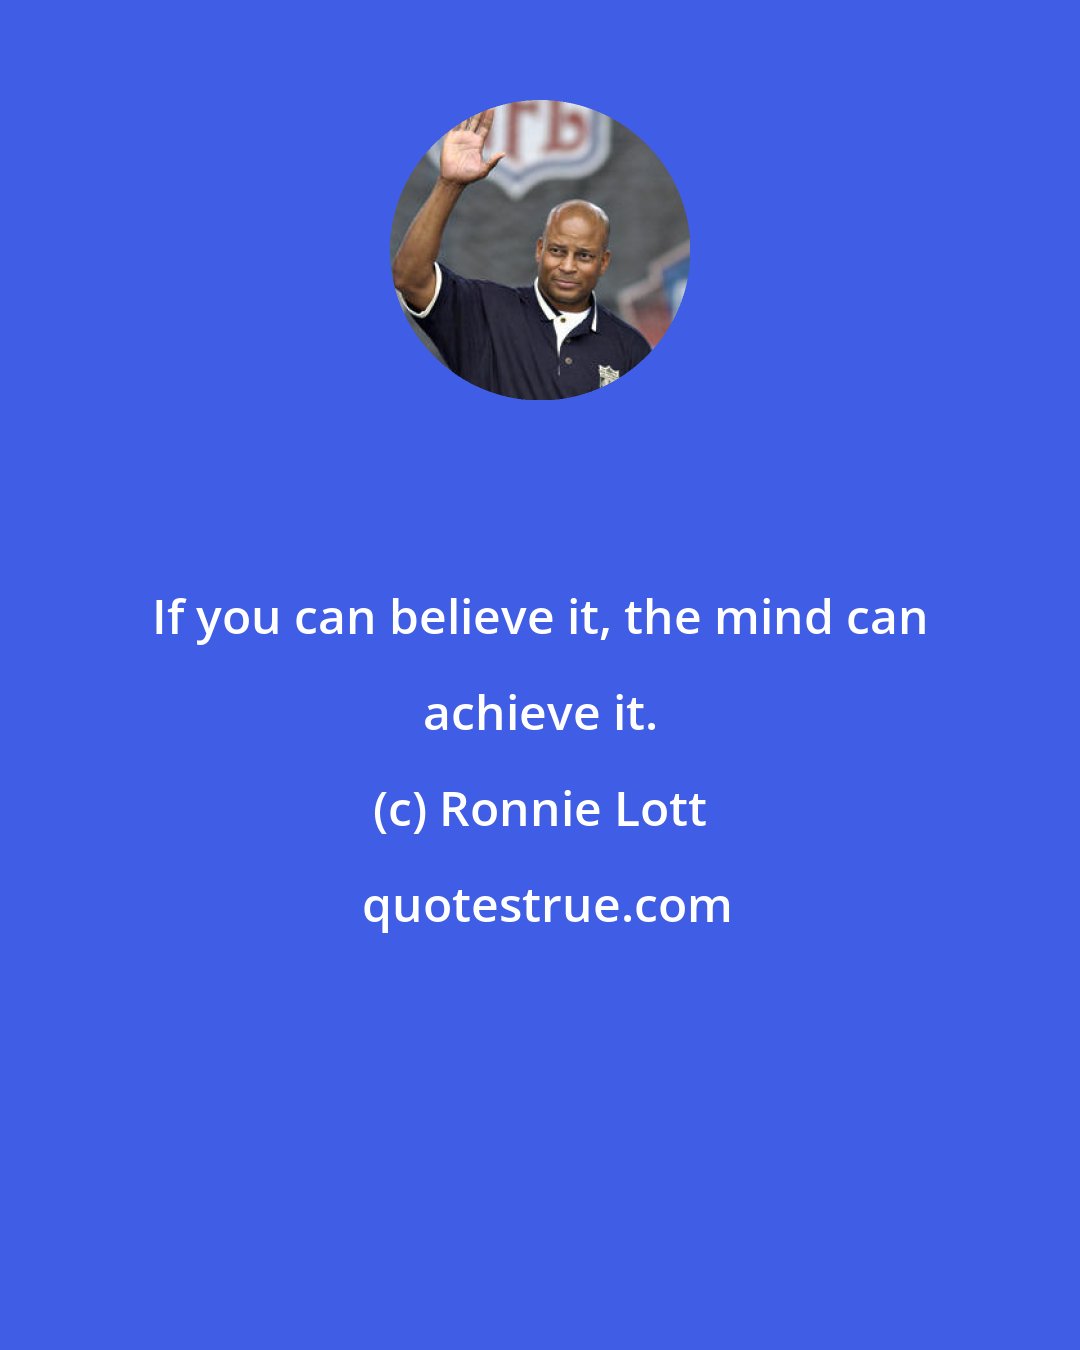 Ronnie Lott: If you can believe it, the mind can achieve it.